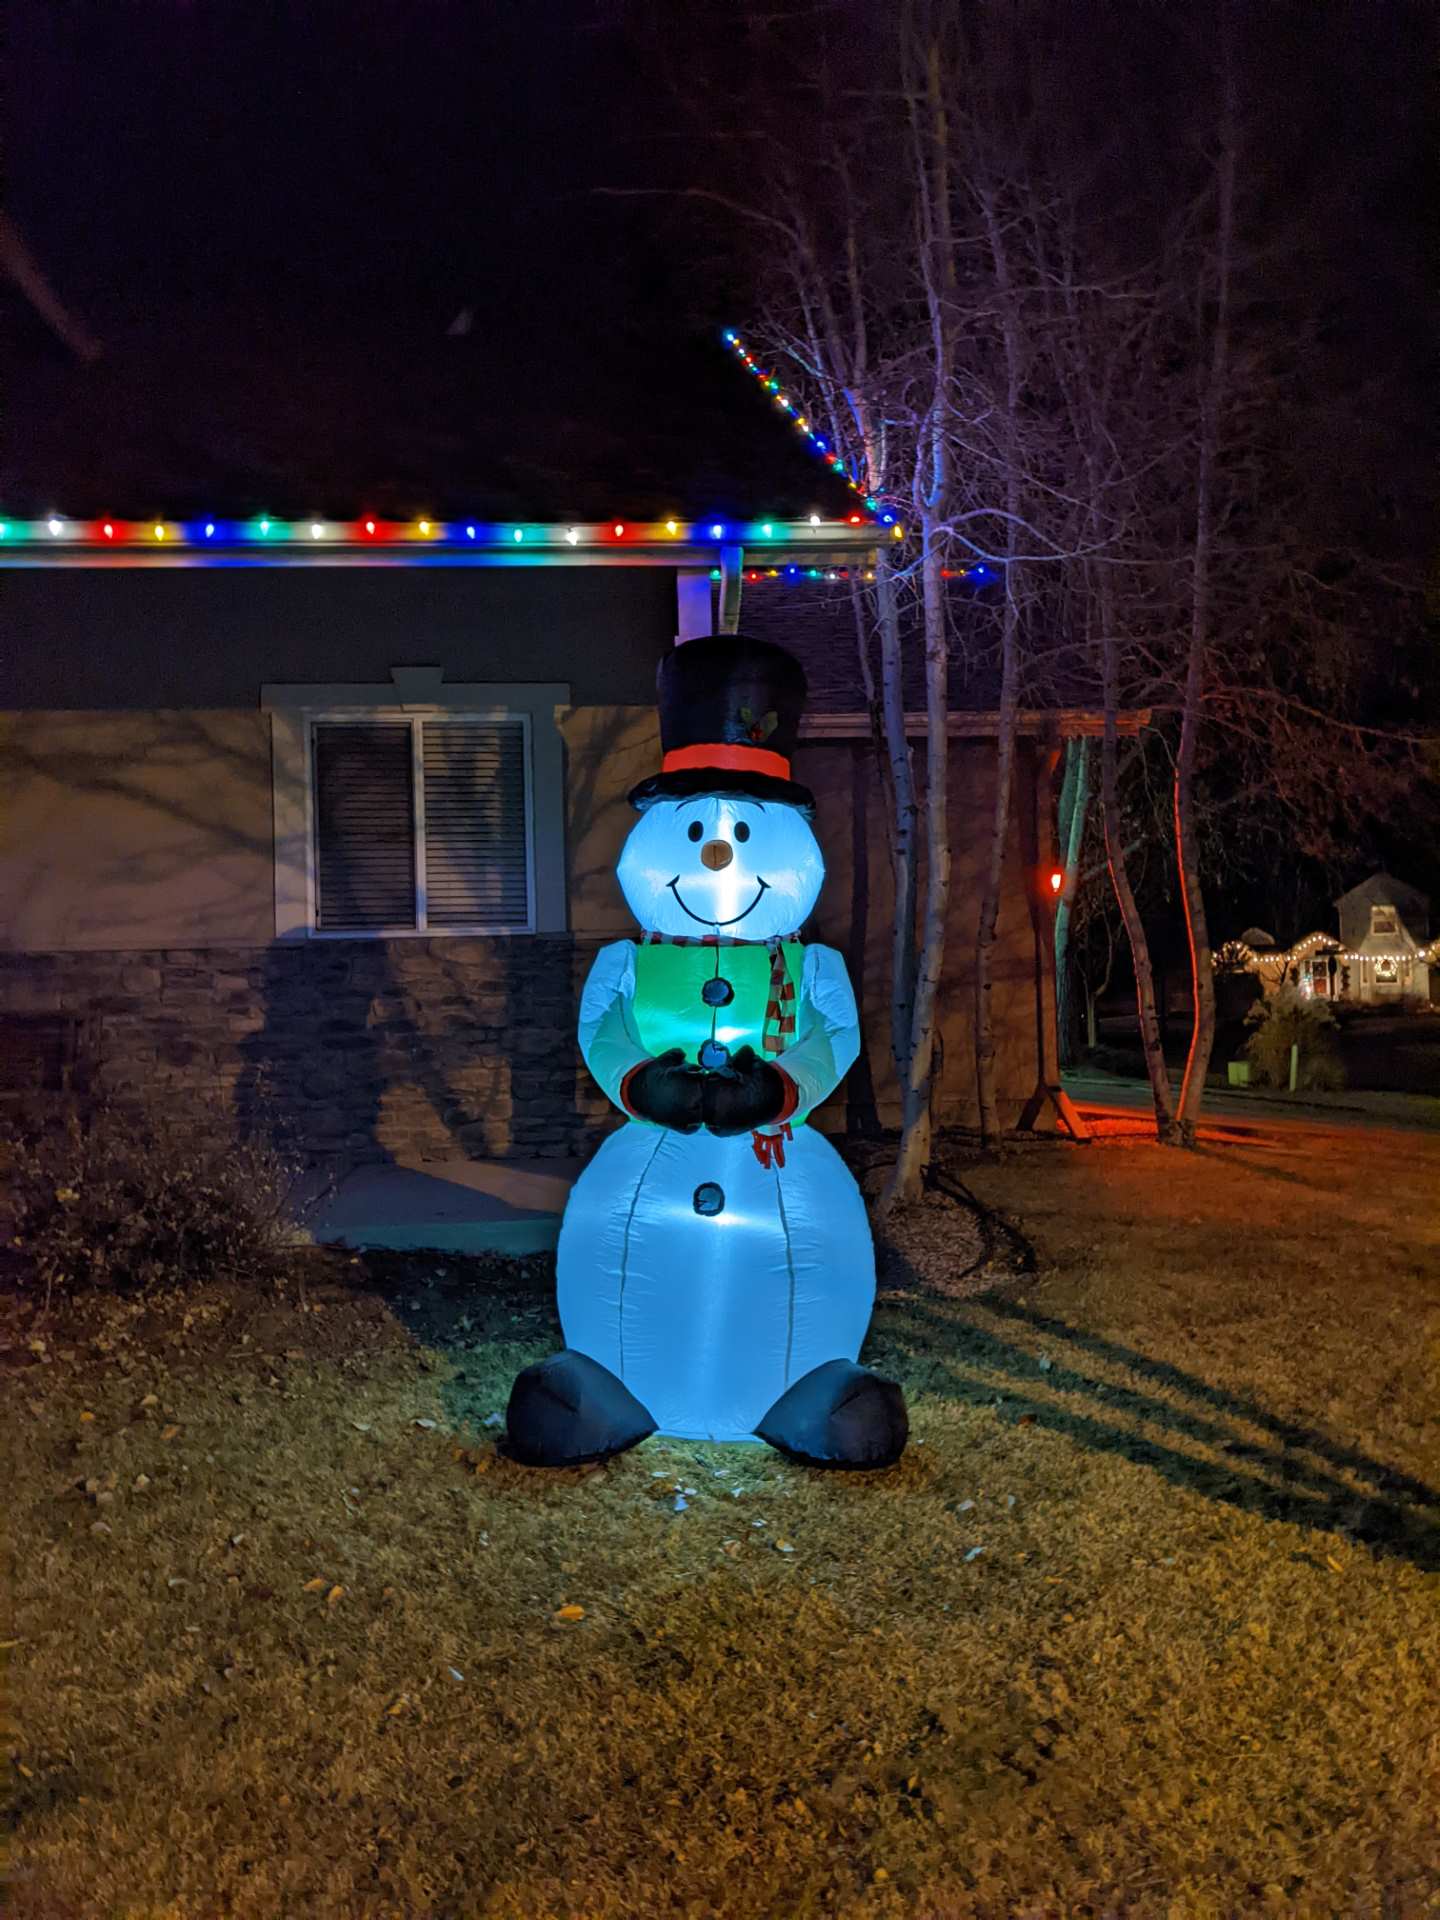 An illuminated happy snowman wearing a black top hat was on this lawn.